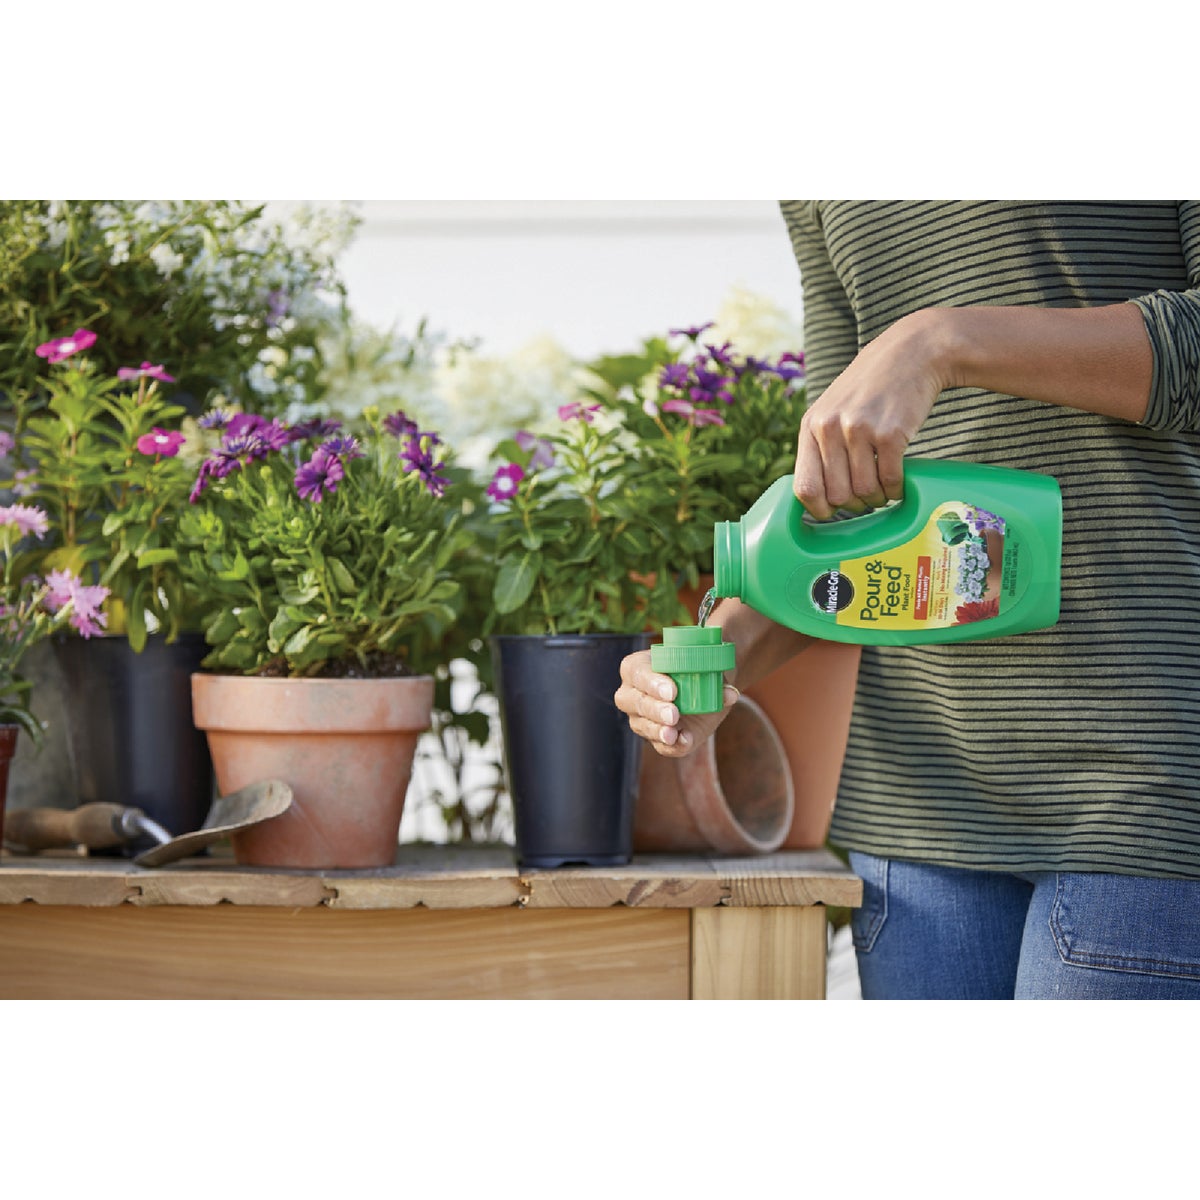 Pour & Feed Miracle-Gro 3006002 Miracle-Gro Pour & Feed 32 Oz. Liquid Plant Food 3006002